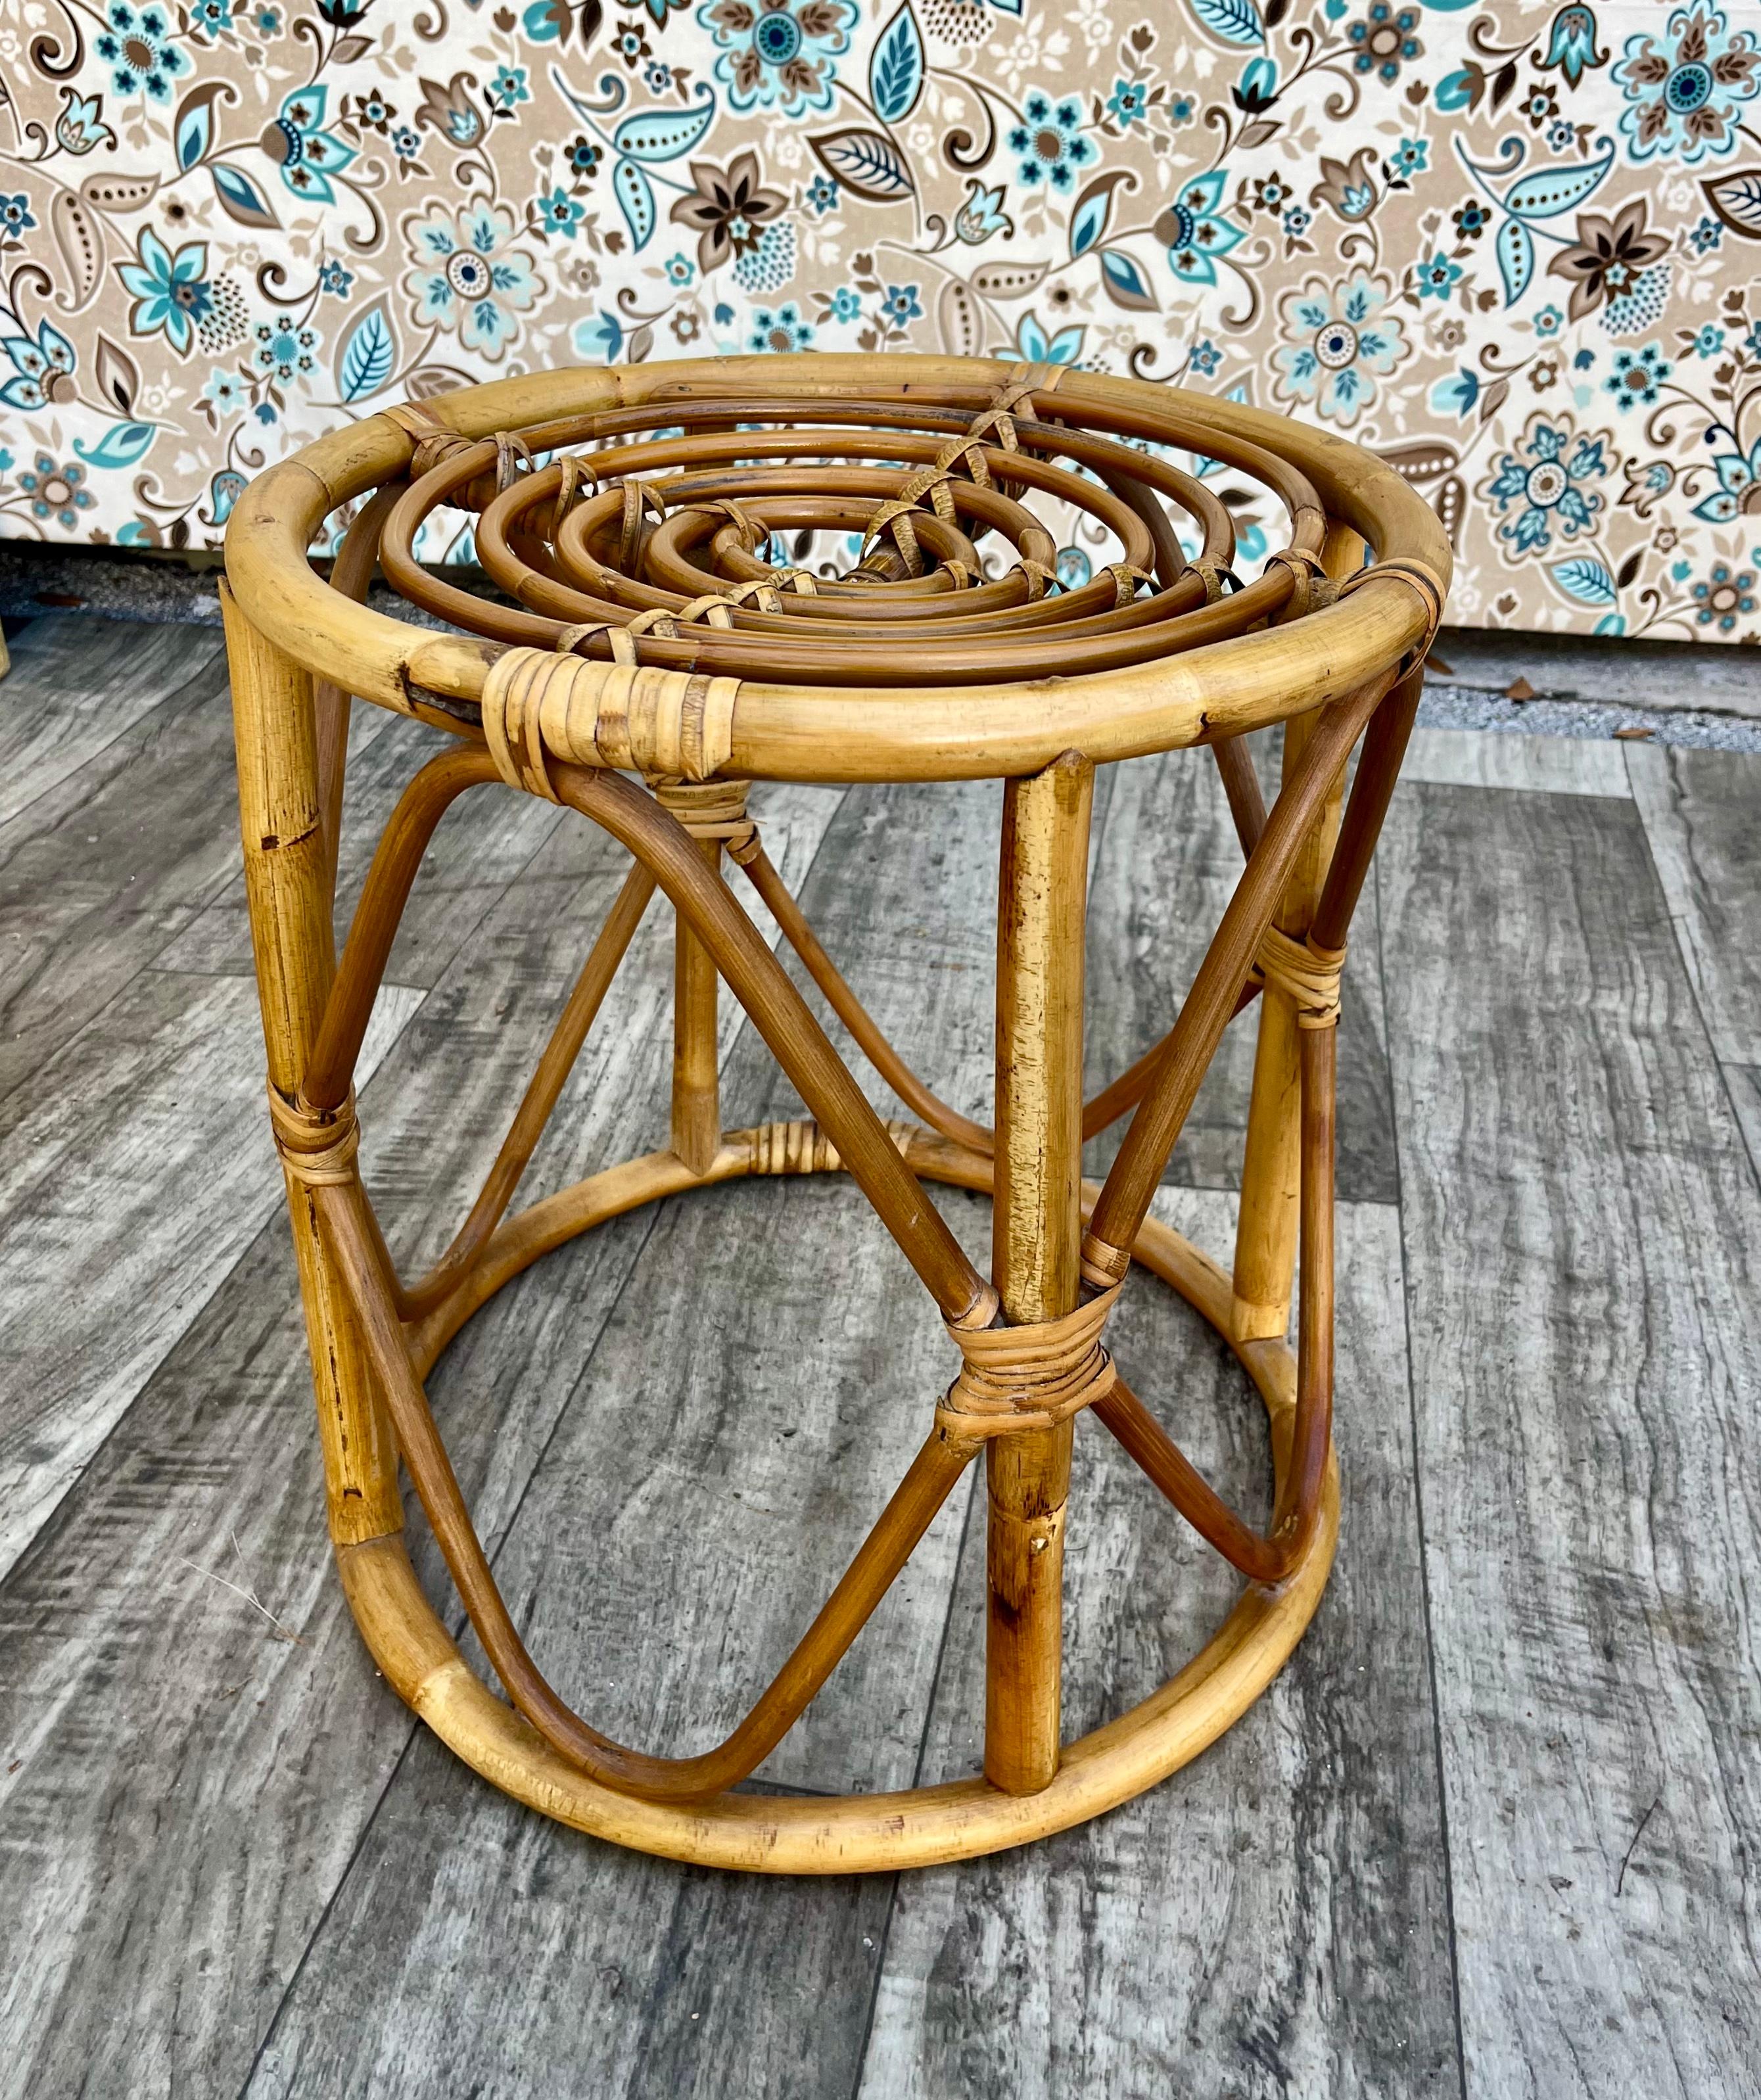 Vintage Coastal Style / Bohemian  Bamboo and Rattan Round Side Table or Stool in the Franco Albini Manner.  Circa 1970s
Features a gracefully bent rattan frame and the perfect size for a lightweight side table or plant stand.
In excellent original